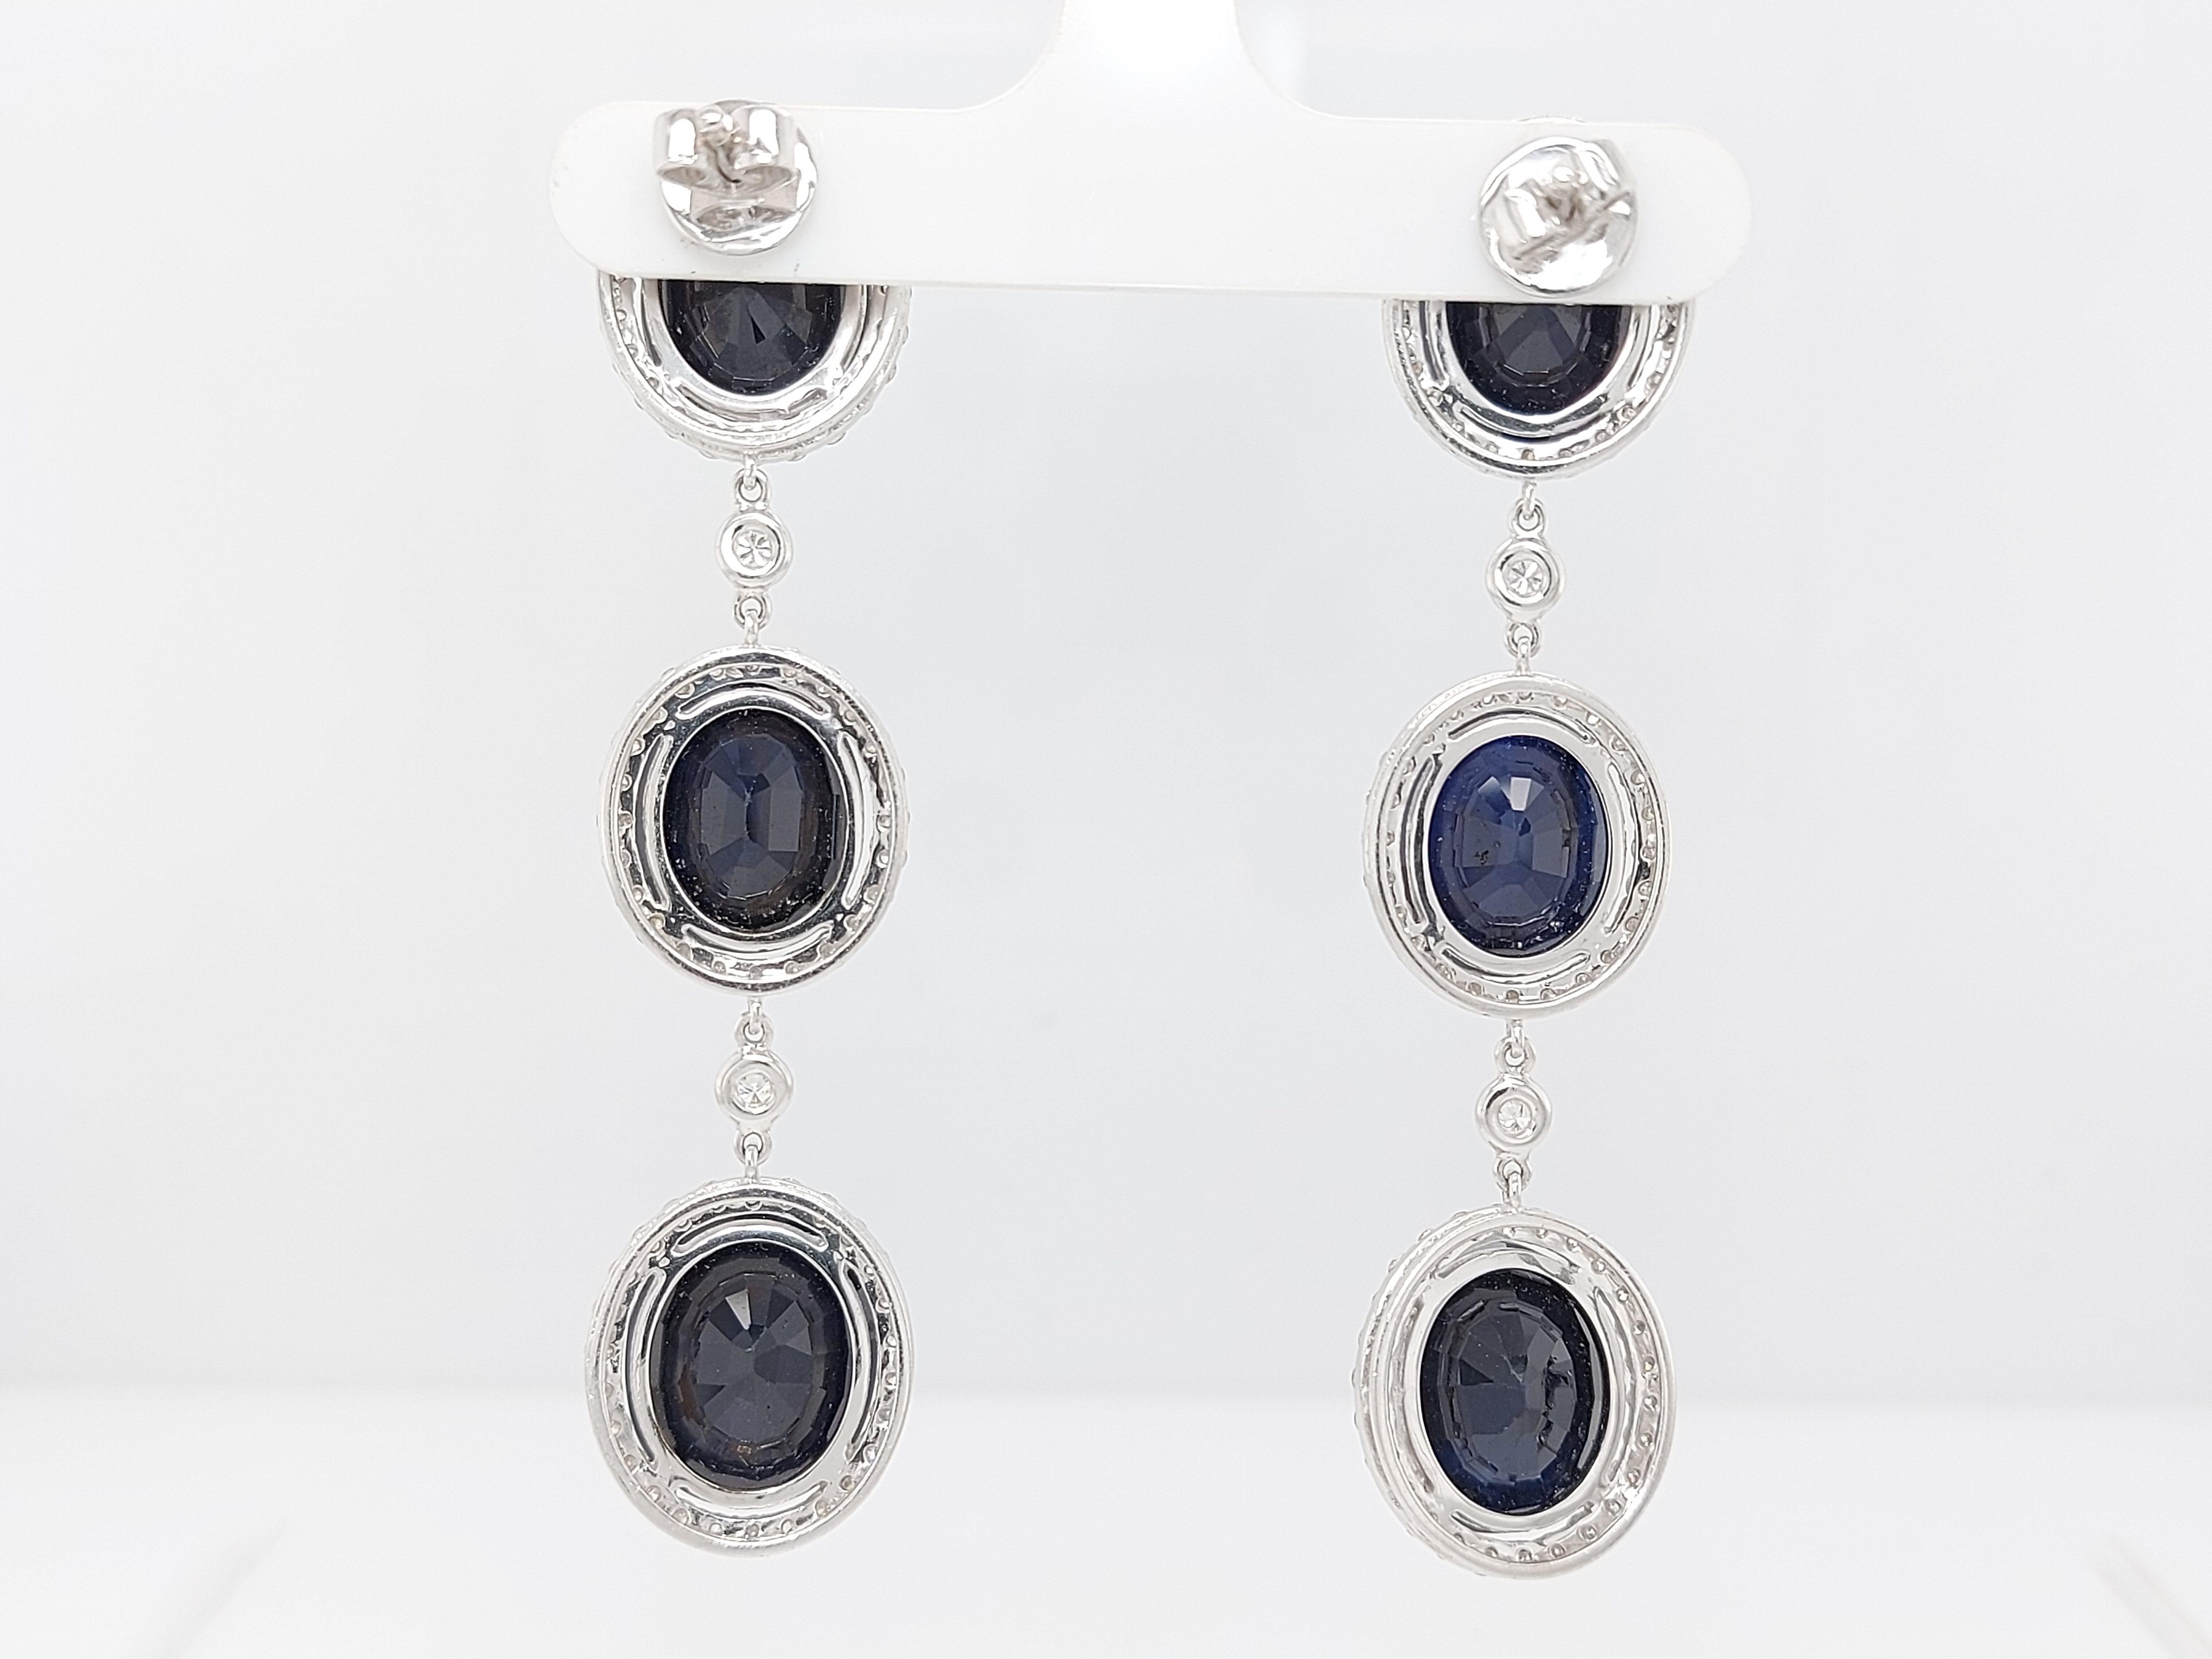 18kt White Gold Earrings 43.56ct Sapphire, 3.51ct Diamond For Sale 6